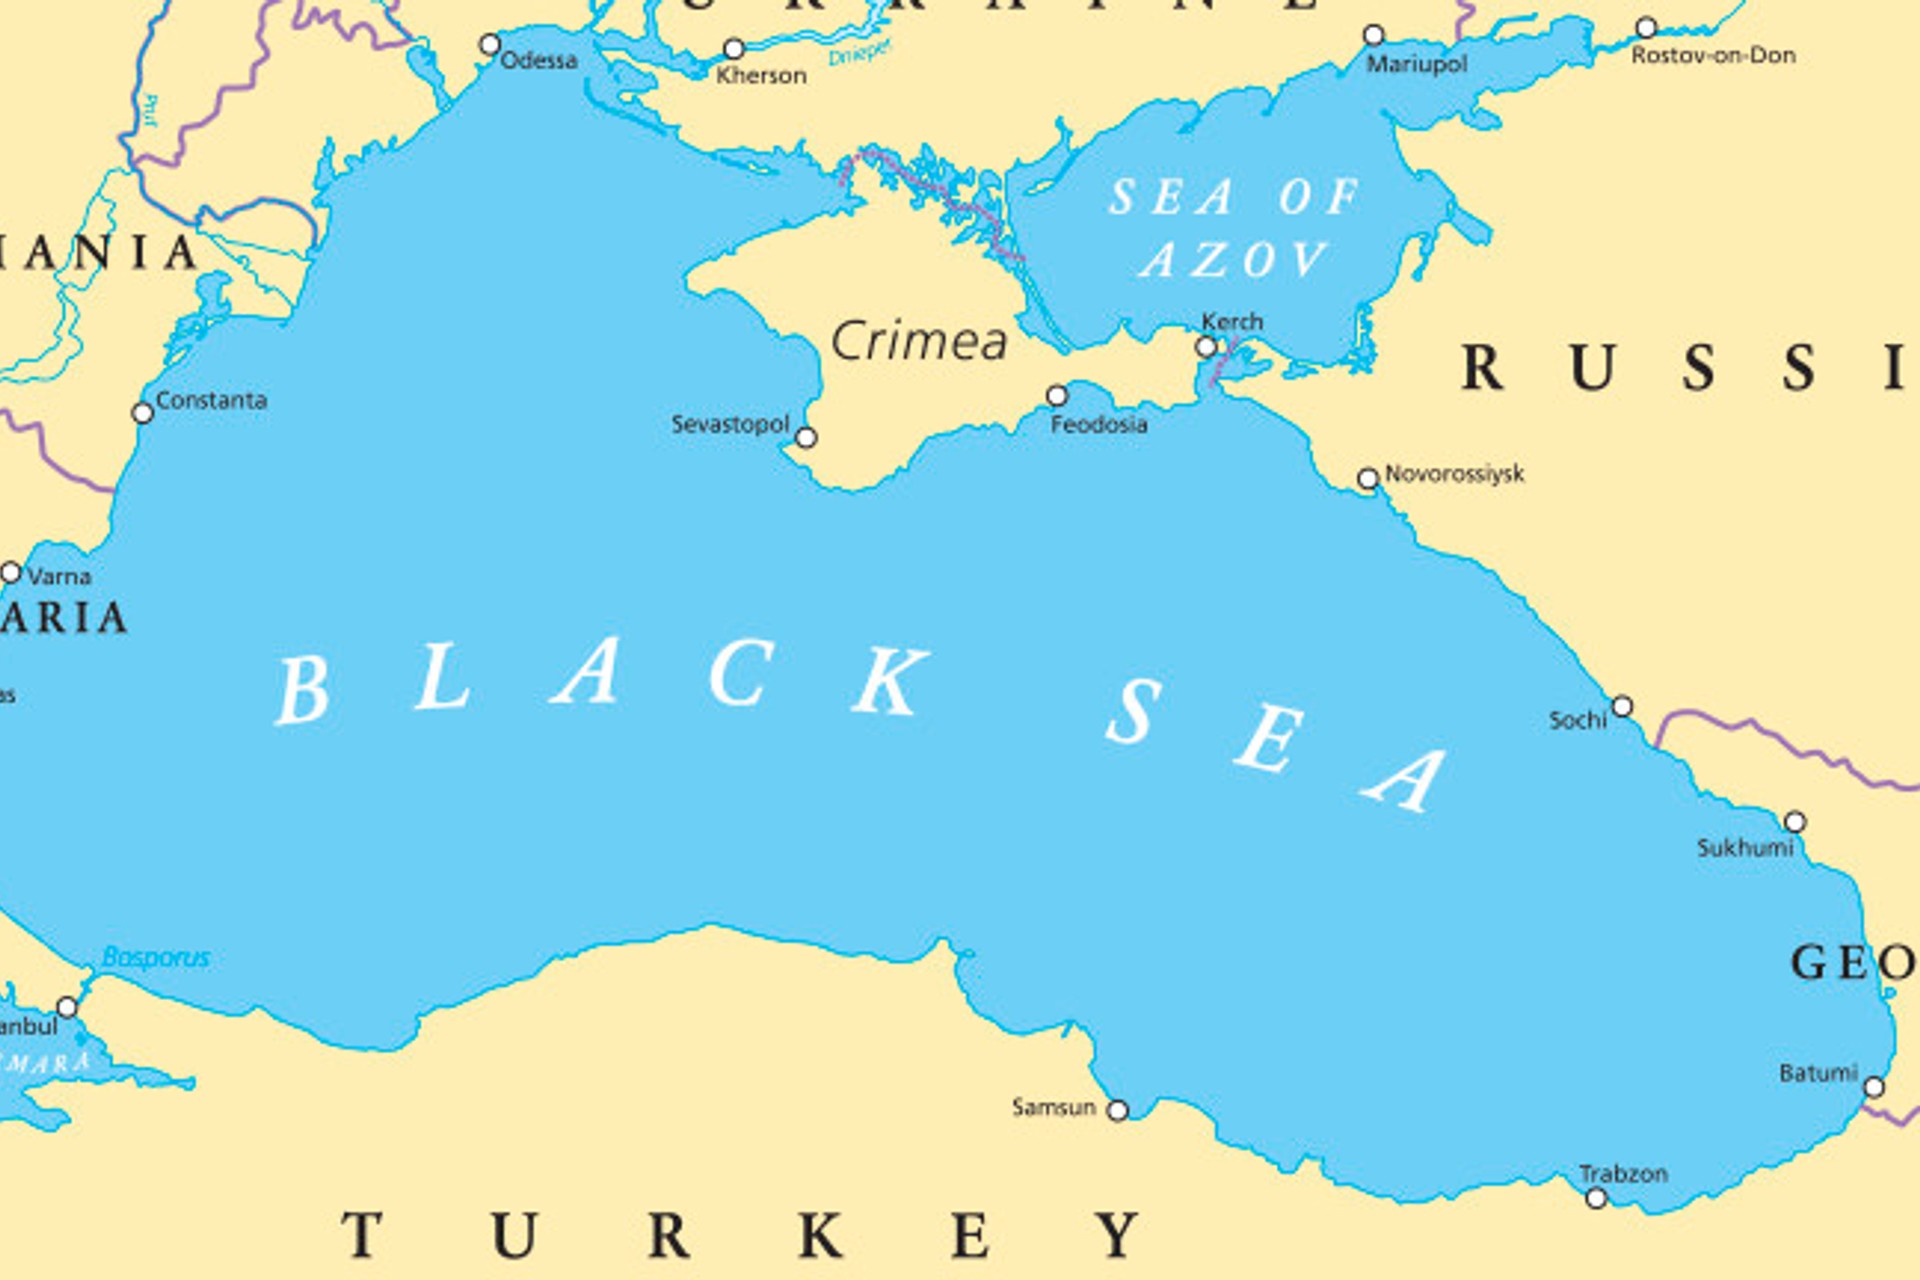 THE GROWING IMPORTANCE OF THE BLACK SEA